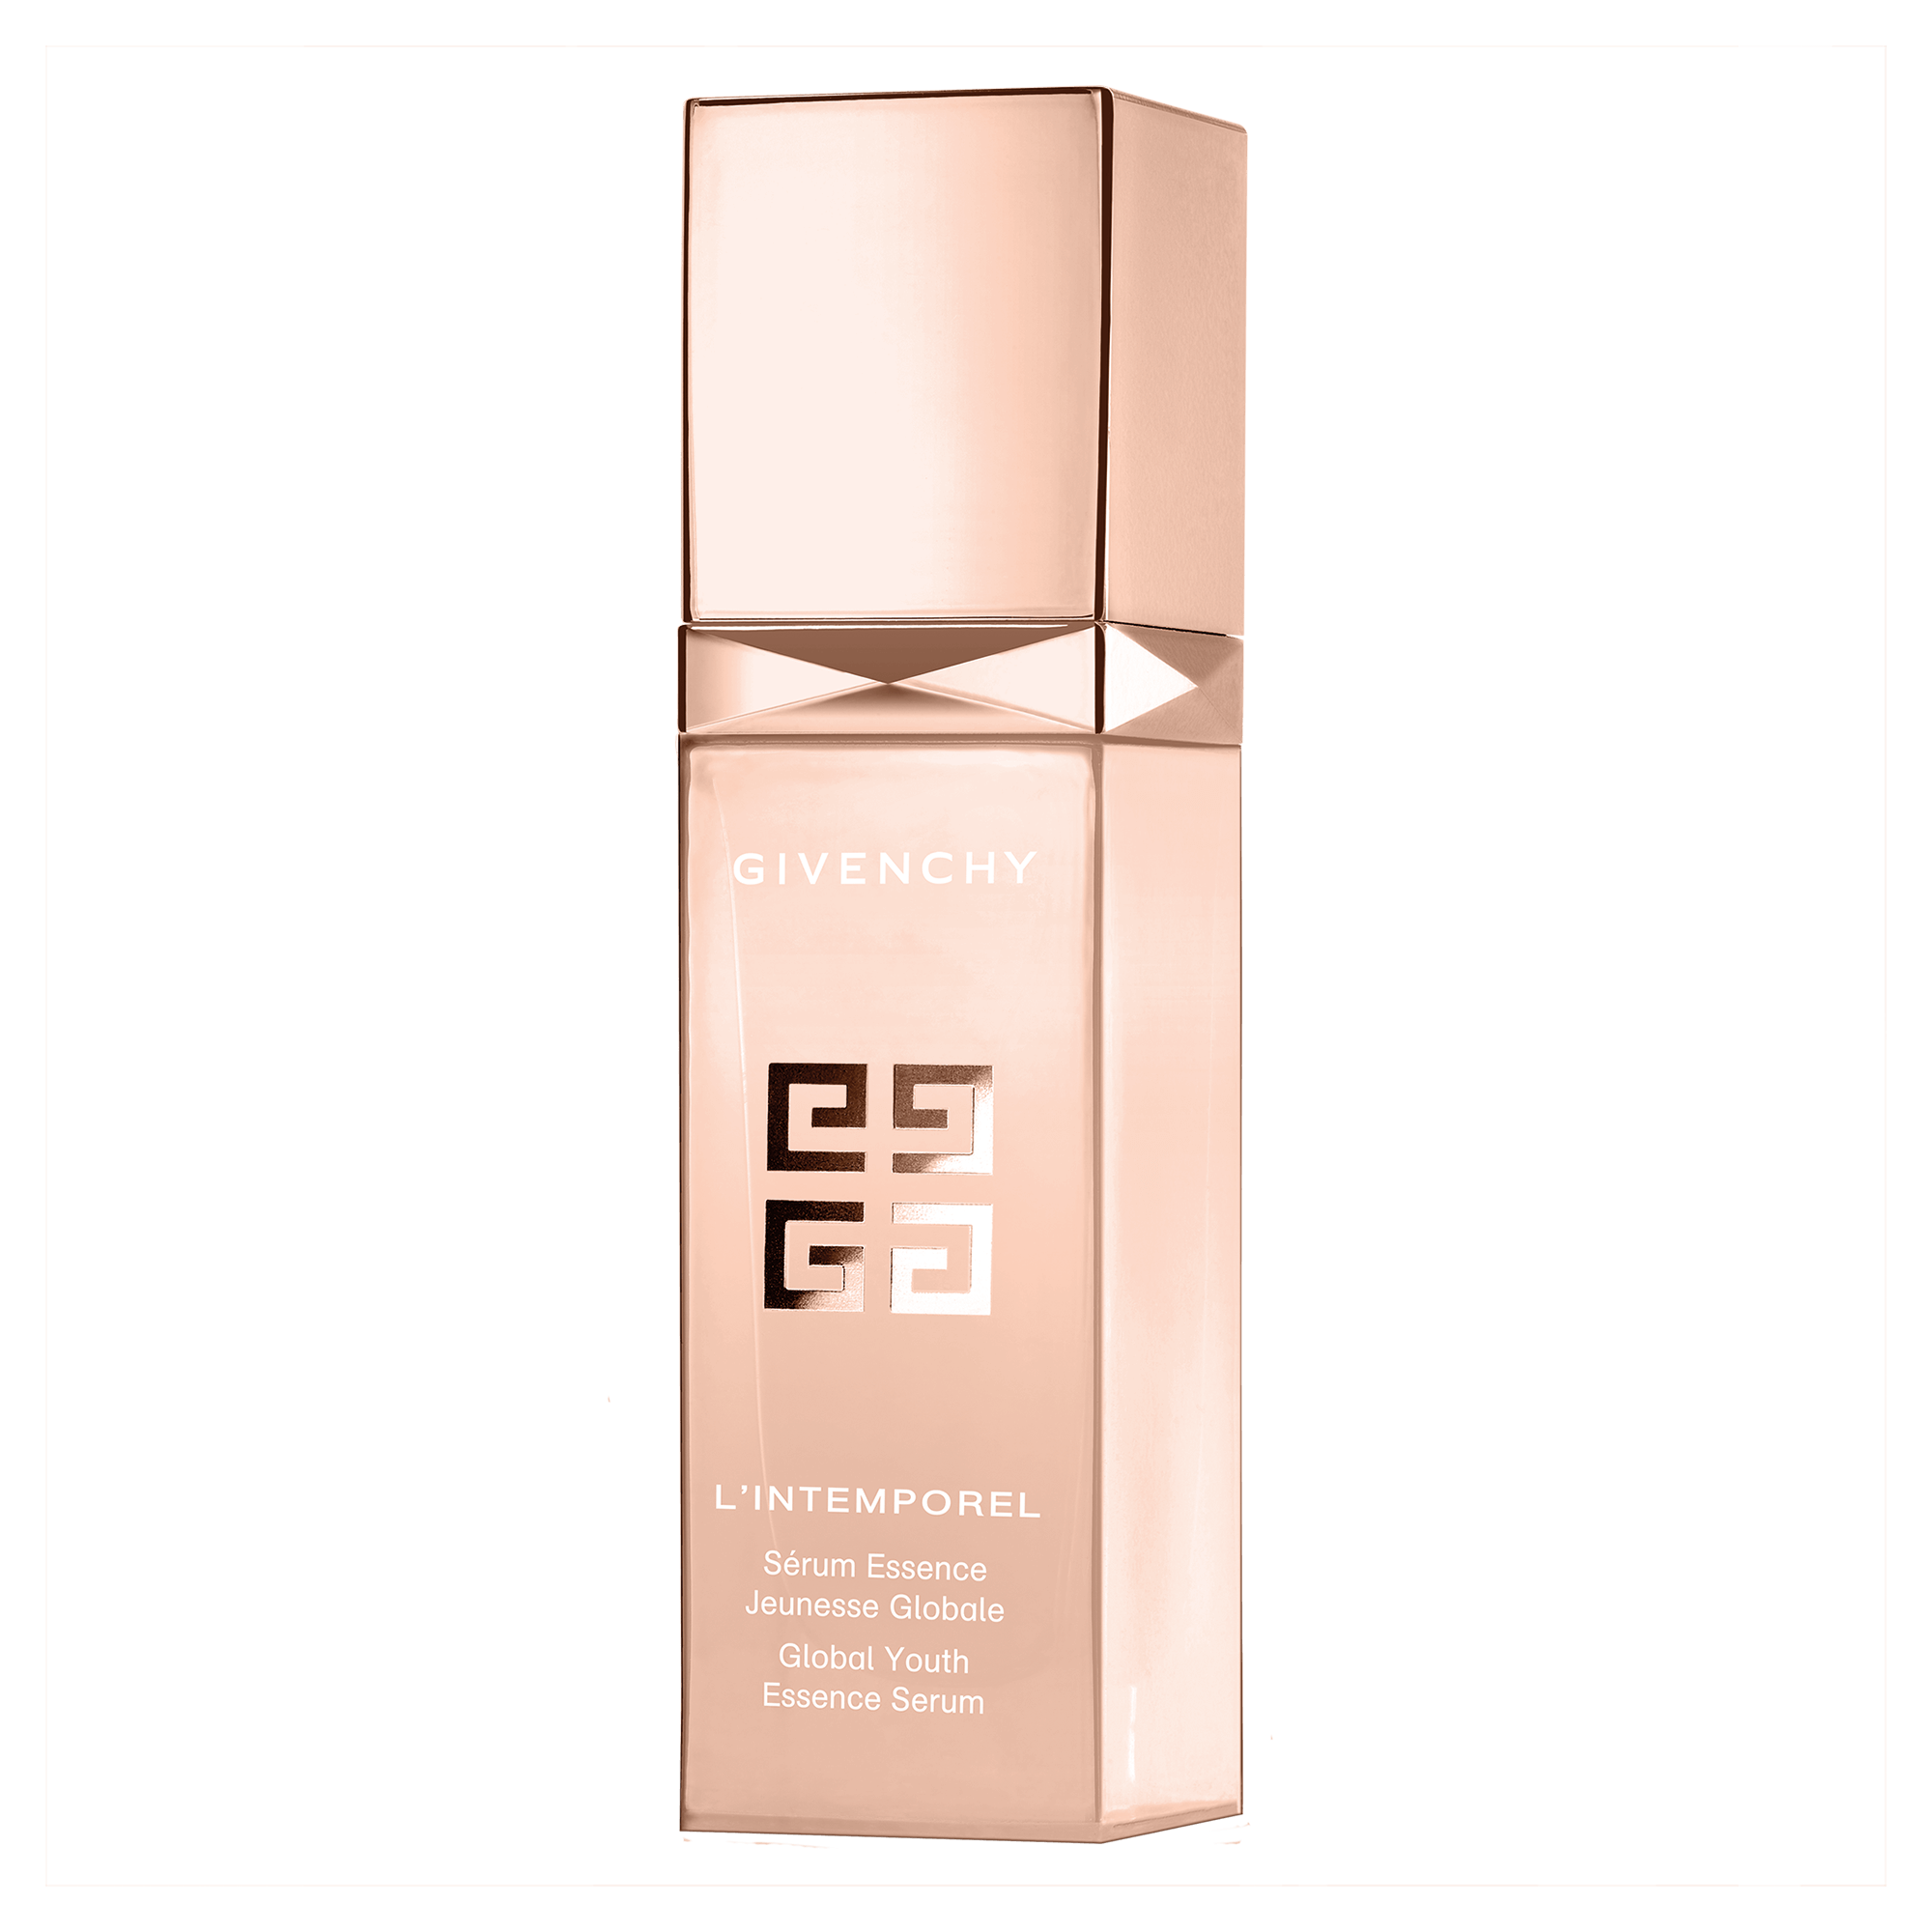 L'INTEMPOREL • Global Youth Essence Serum ∷ GIVENCHY